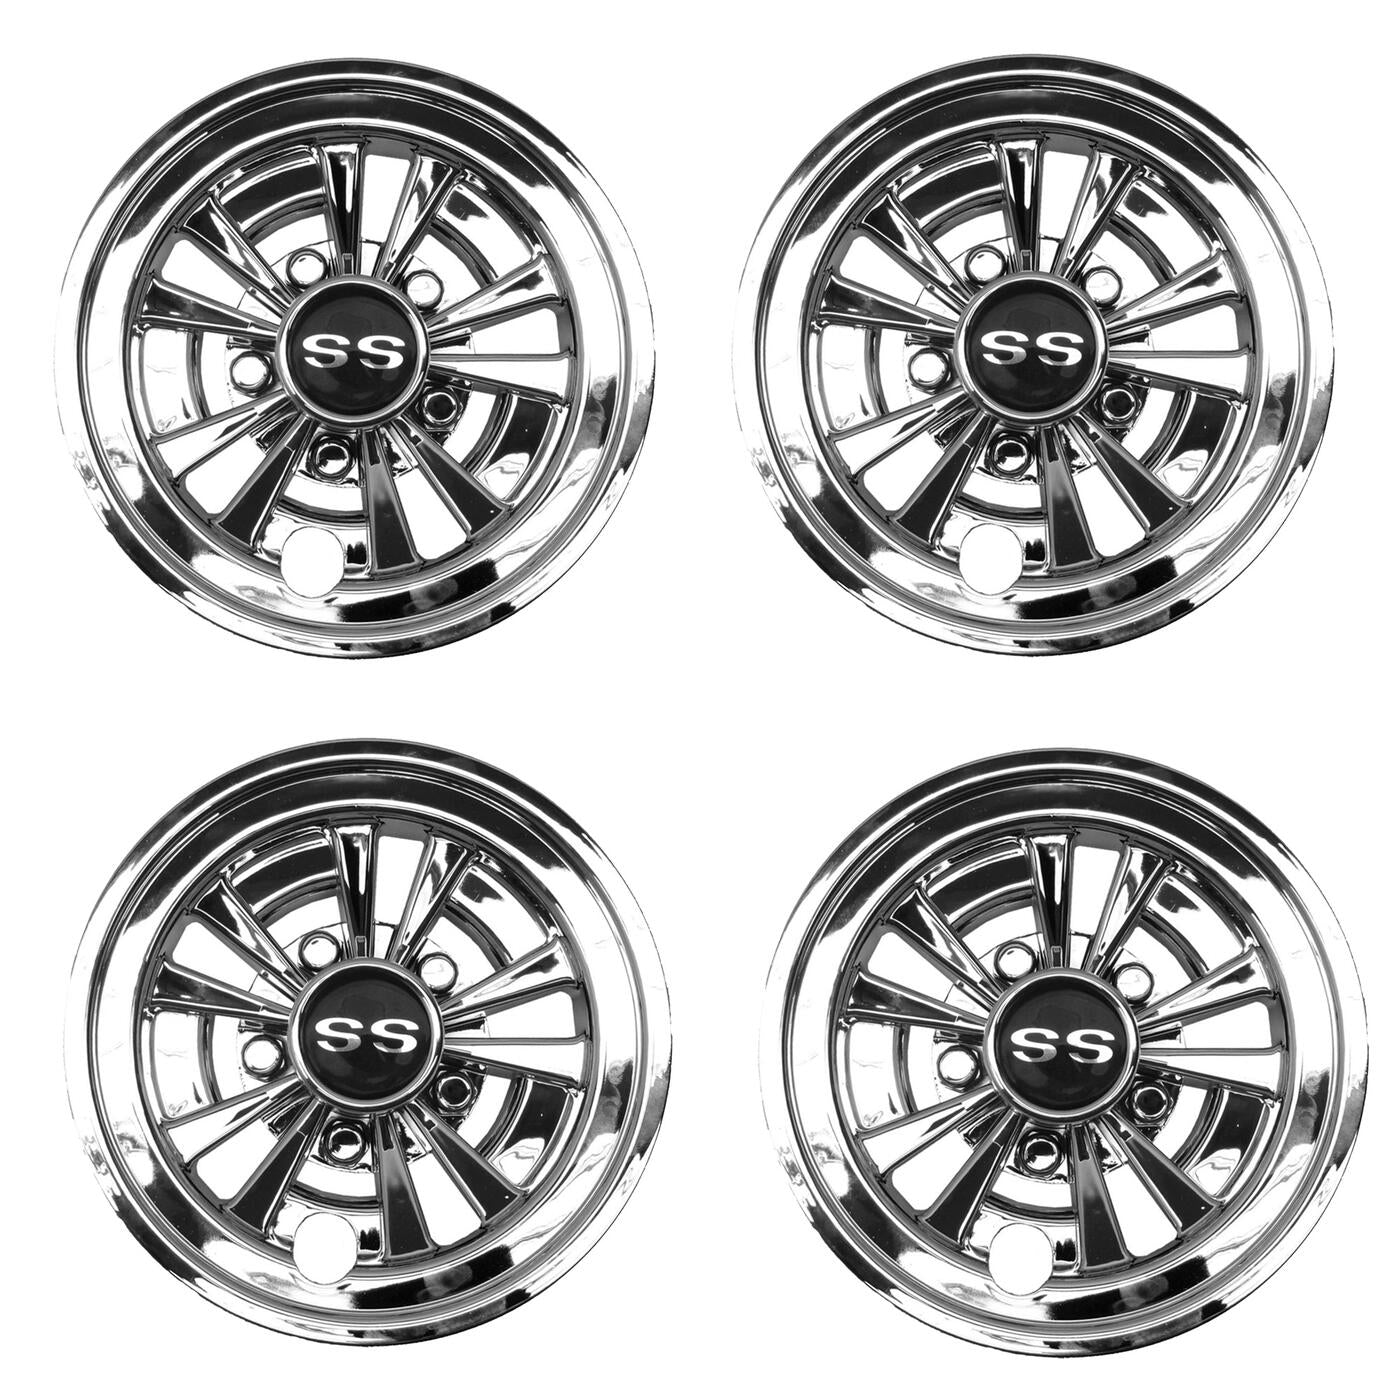 GTW 8 inch Golf Cart Wheel Covers - Set of 4 03-079